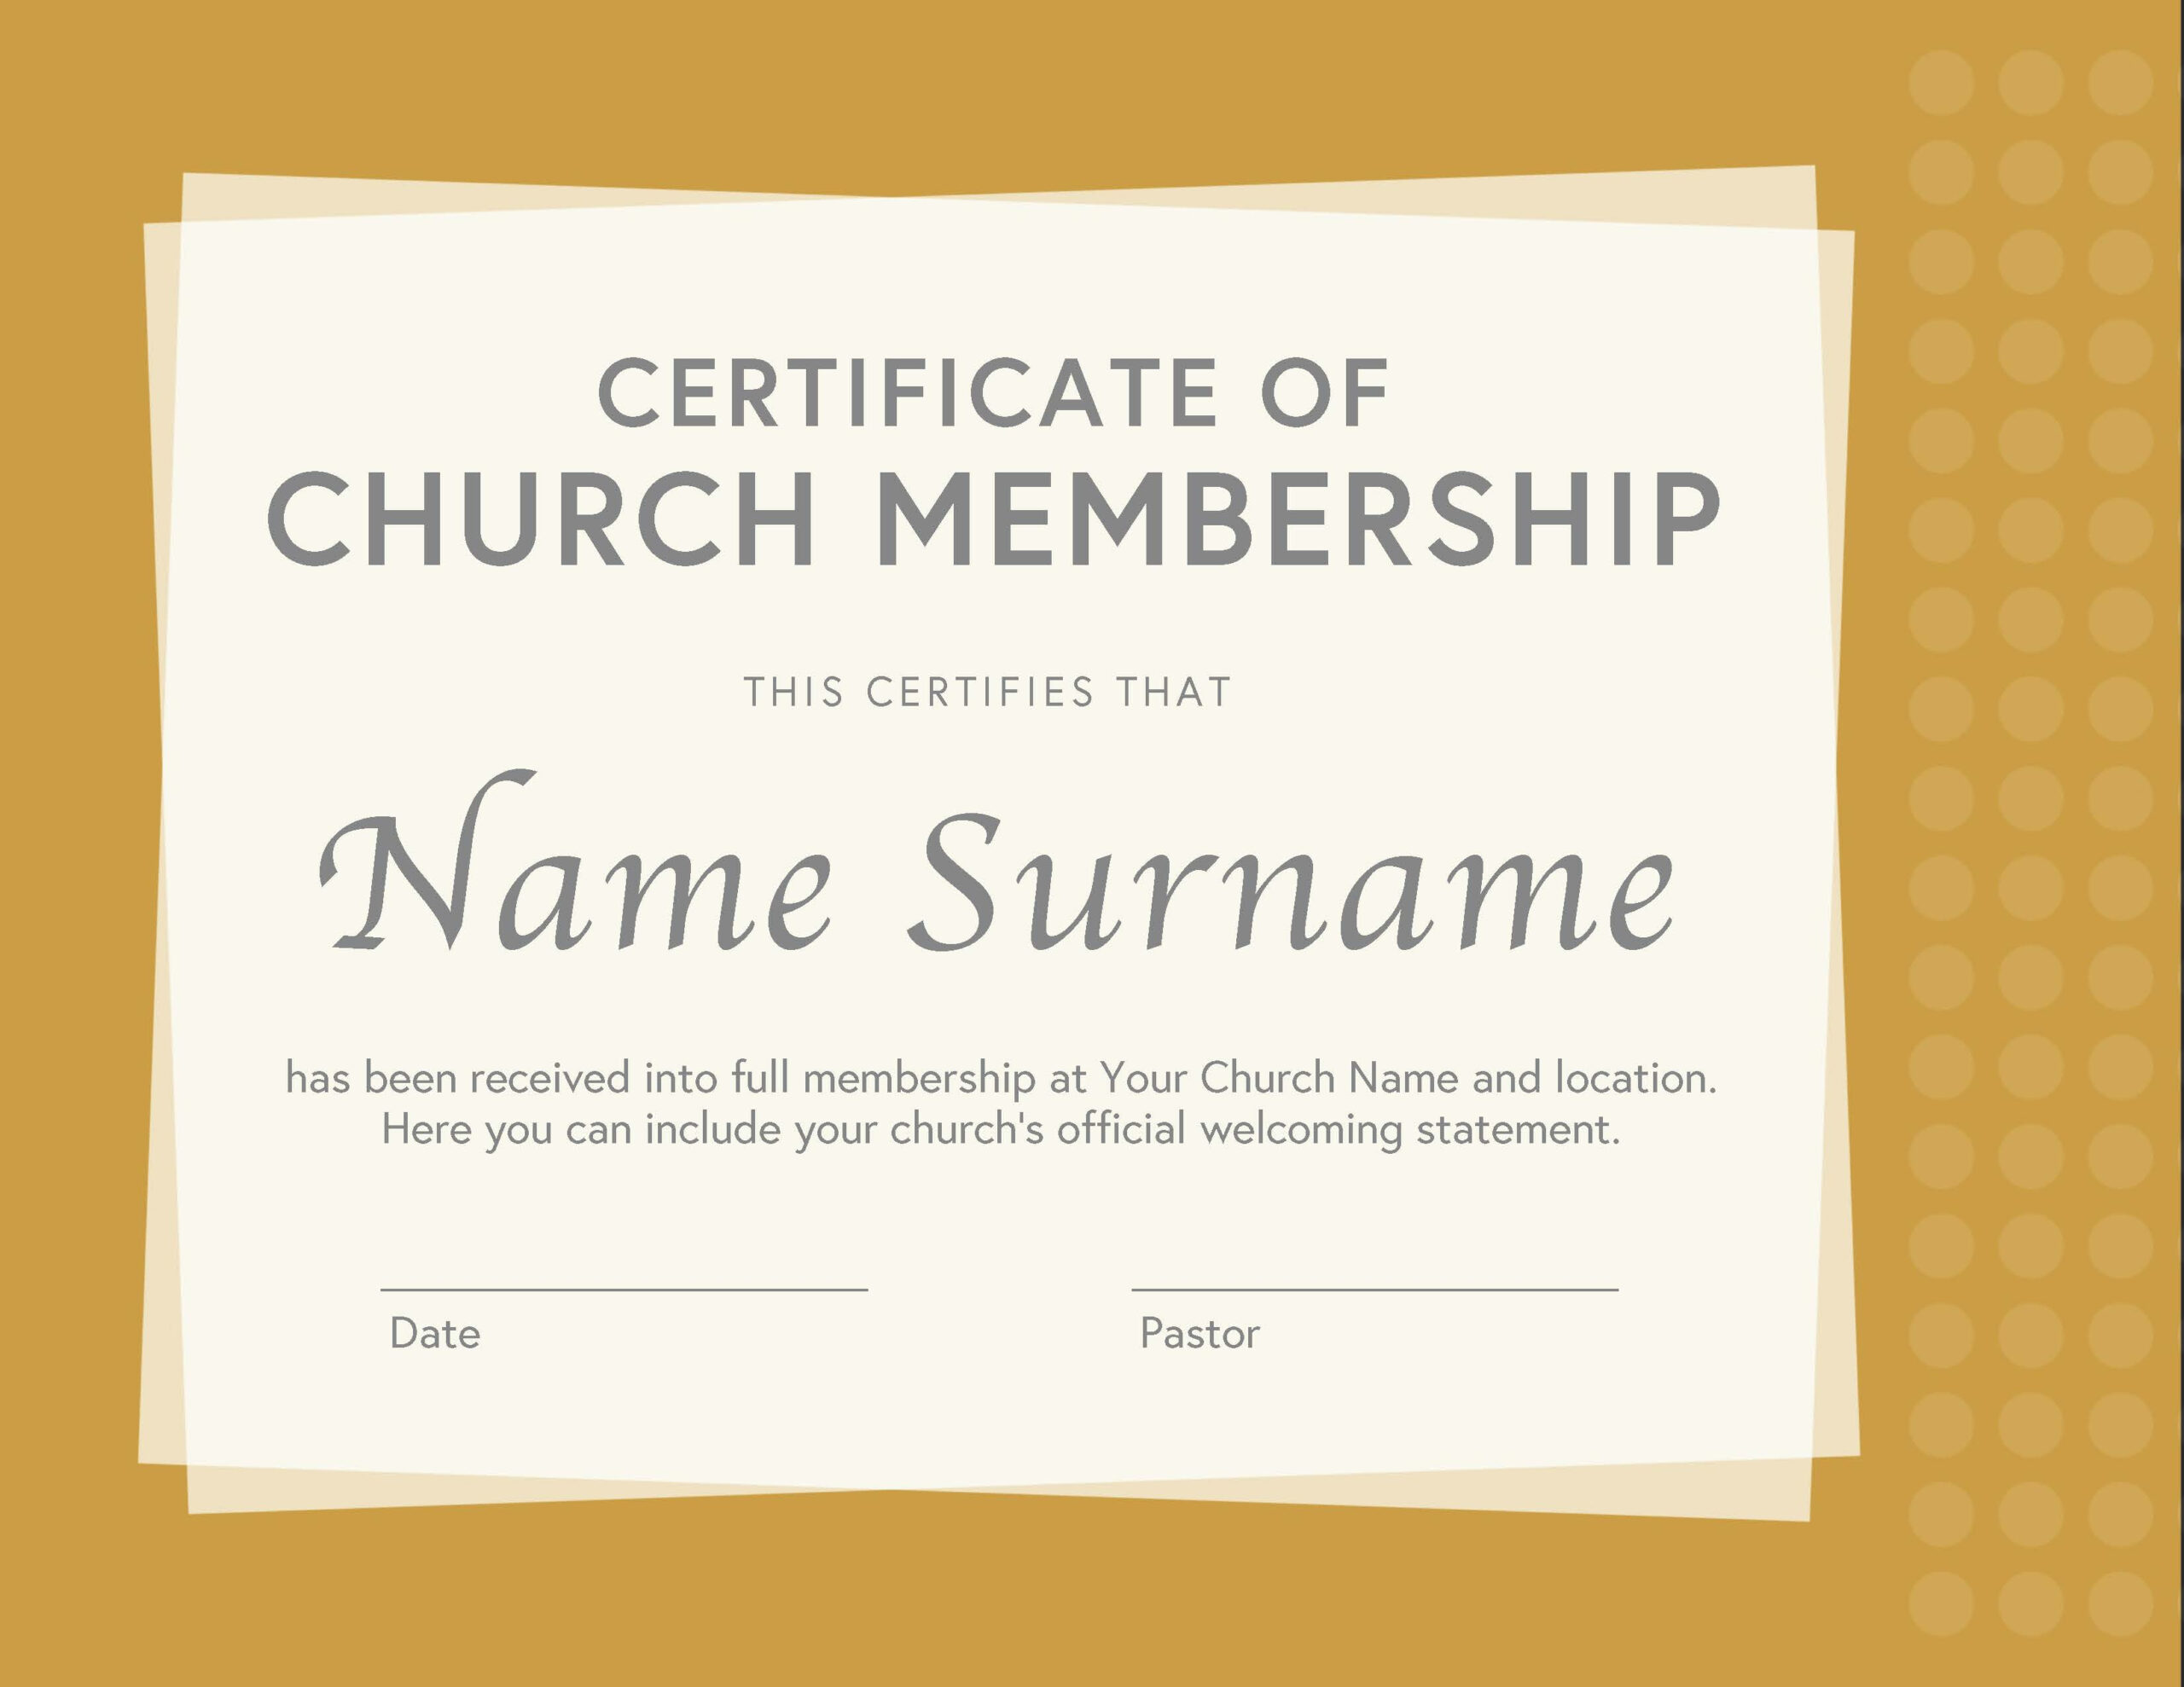 10 Free Membership Certificate Templates for Any Occasion Throughout Life Membership Certificate Templates